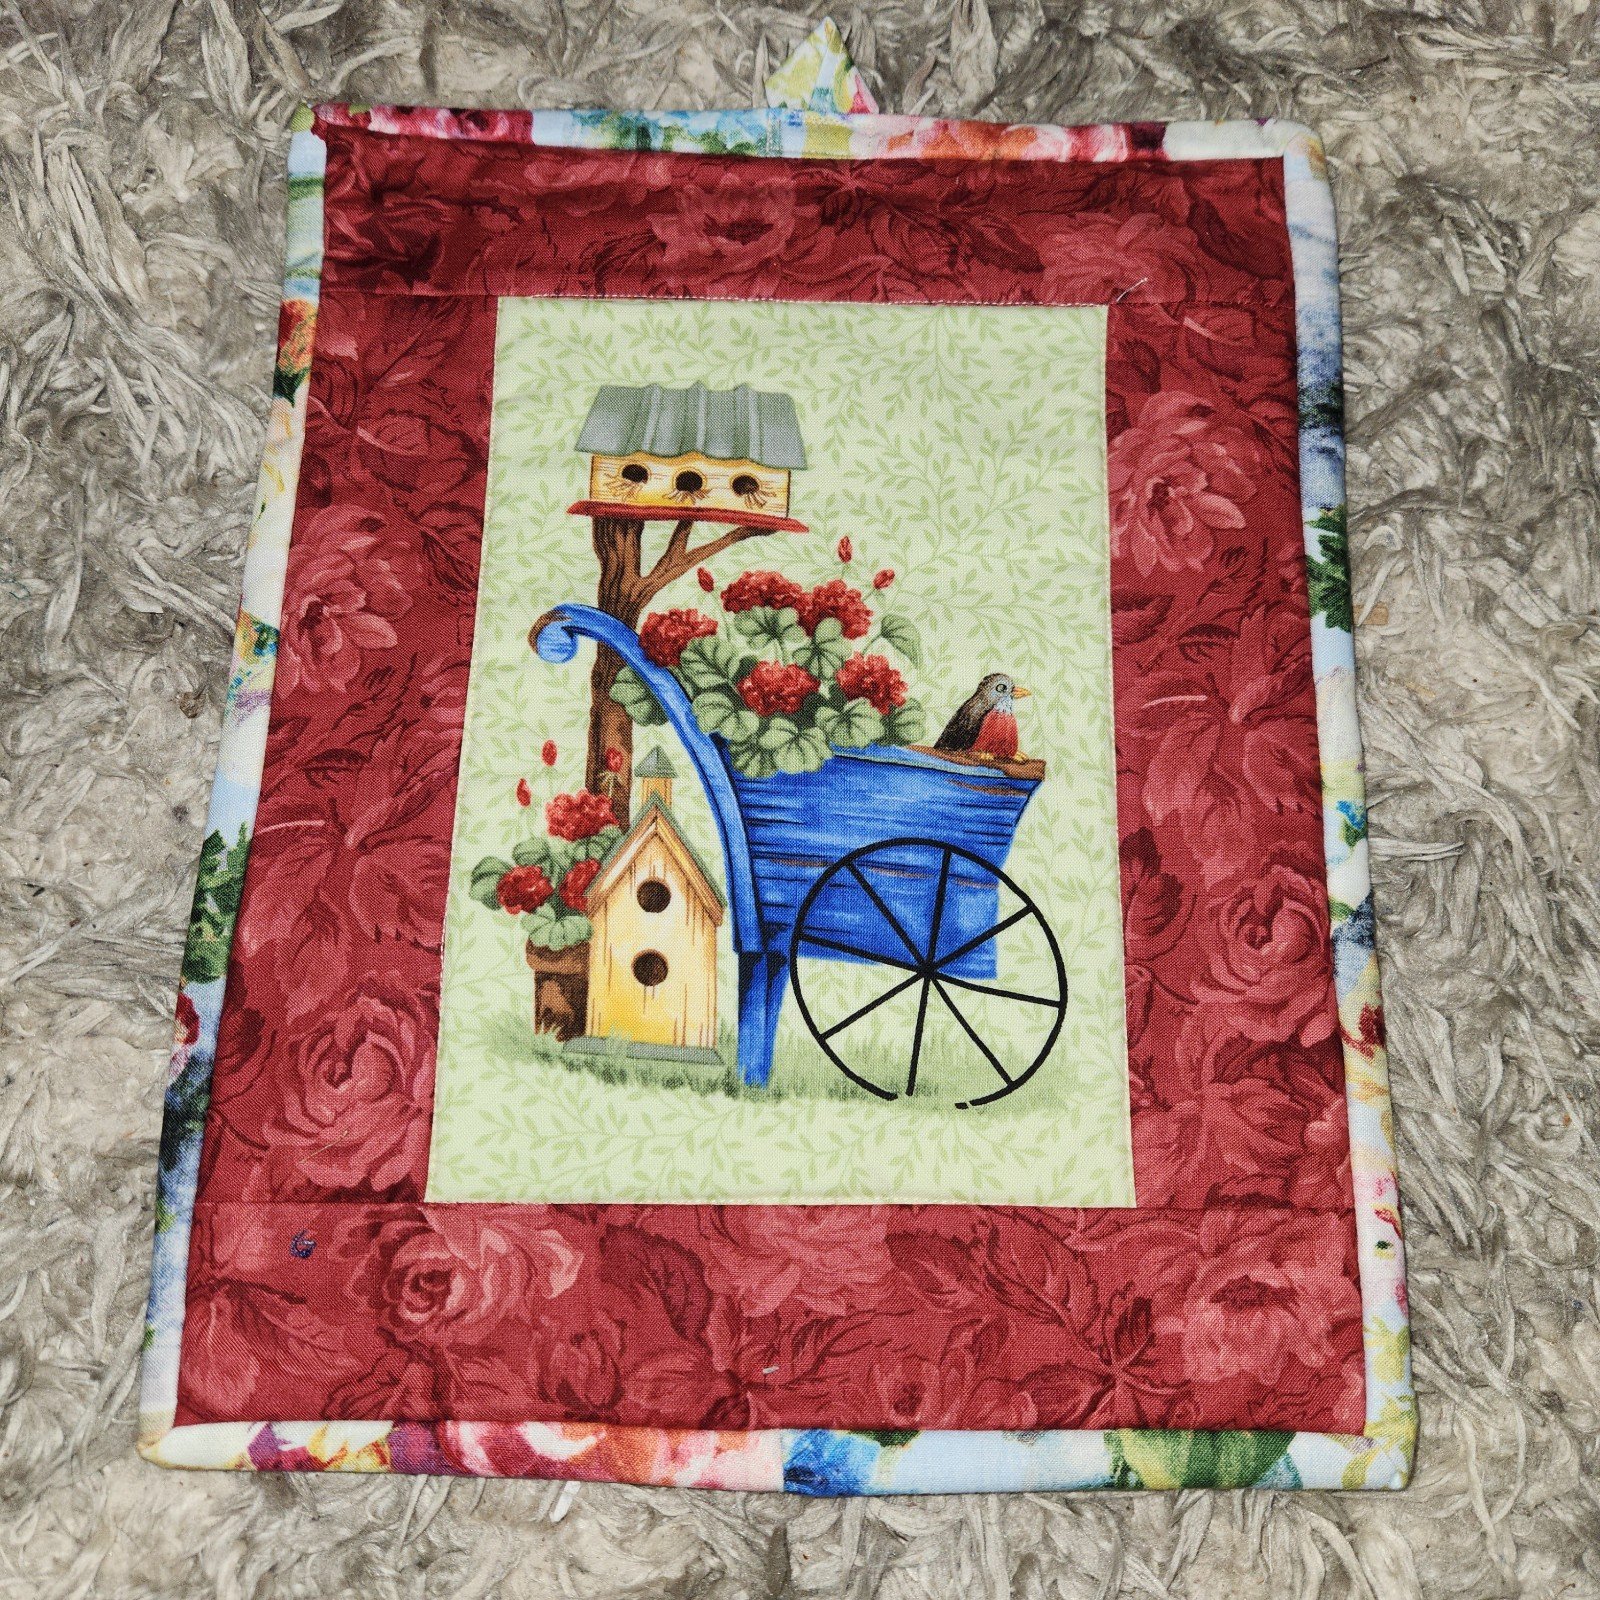 Quilted Patchwork Wall Hanging Bird House 14x11 Inch eZYG8P0Ze